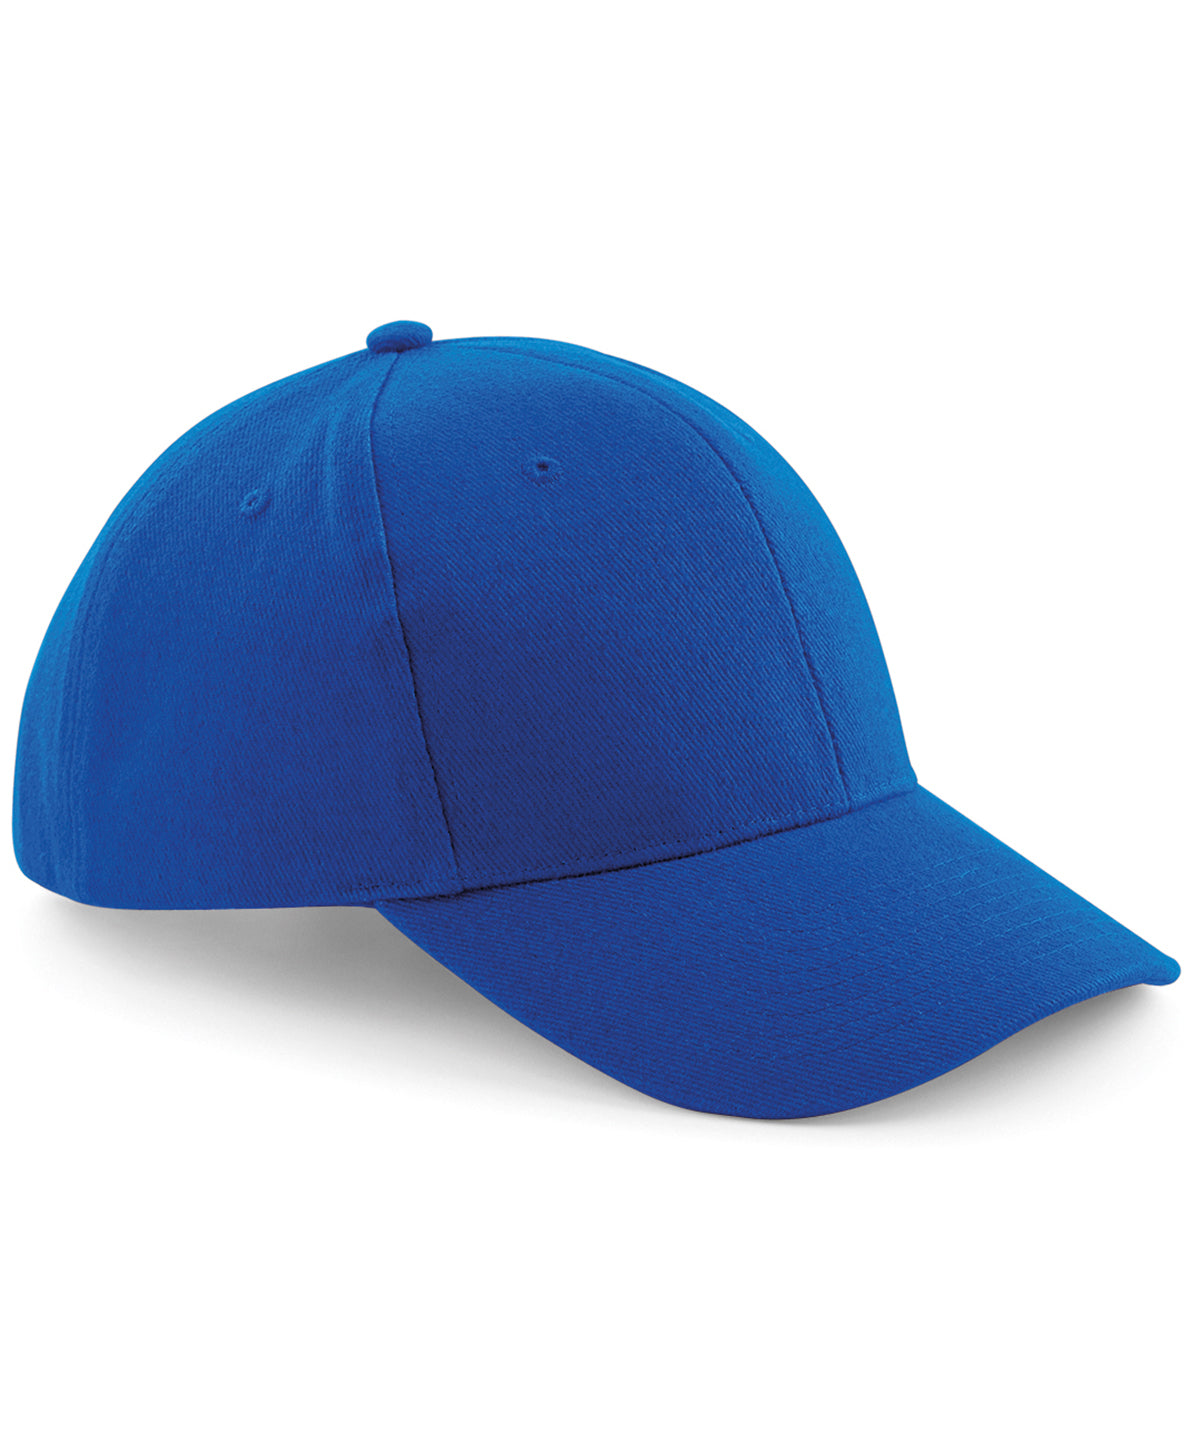 Personalised Caps - Royal Beechfield Pro-style heavy brushed cotton cap